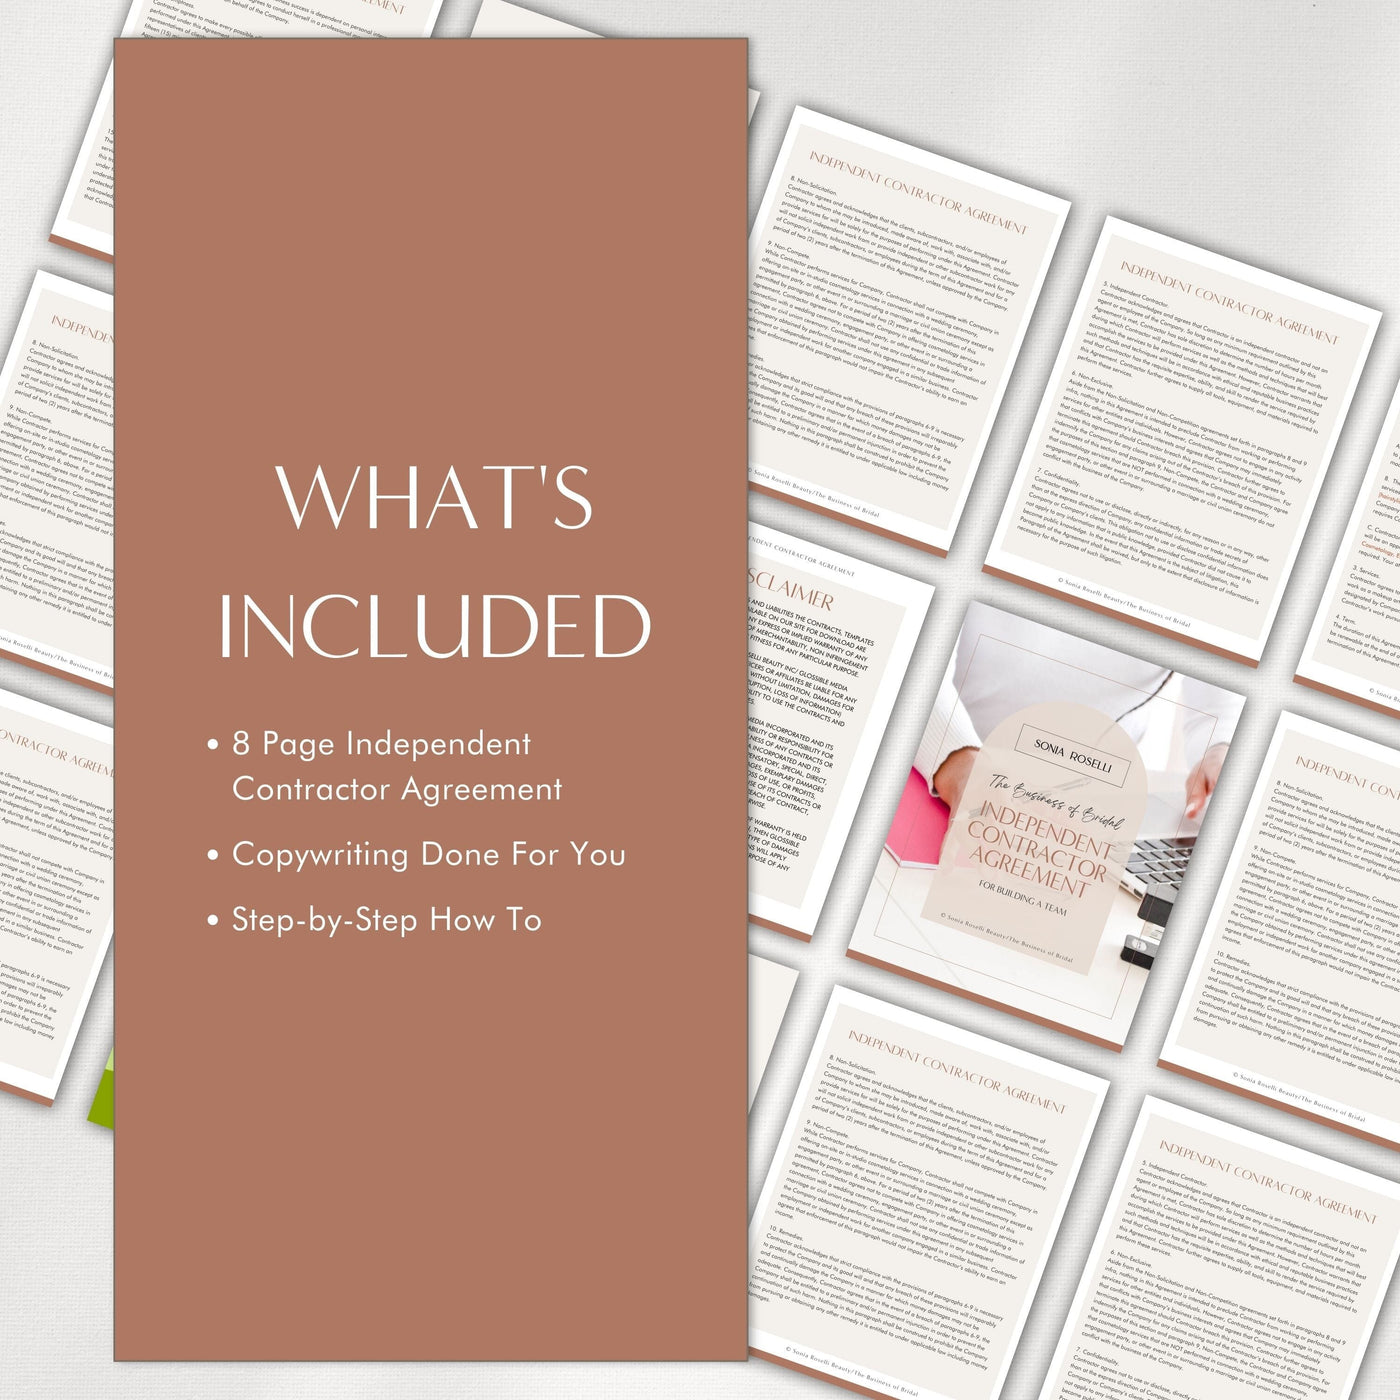 what's included: 8 page independent contractor agreement, copywriting done for you, step-by-step how to 